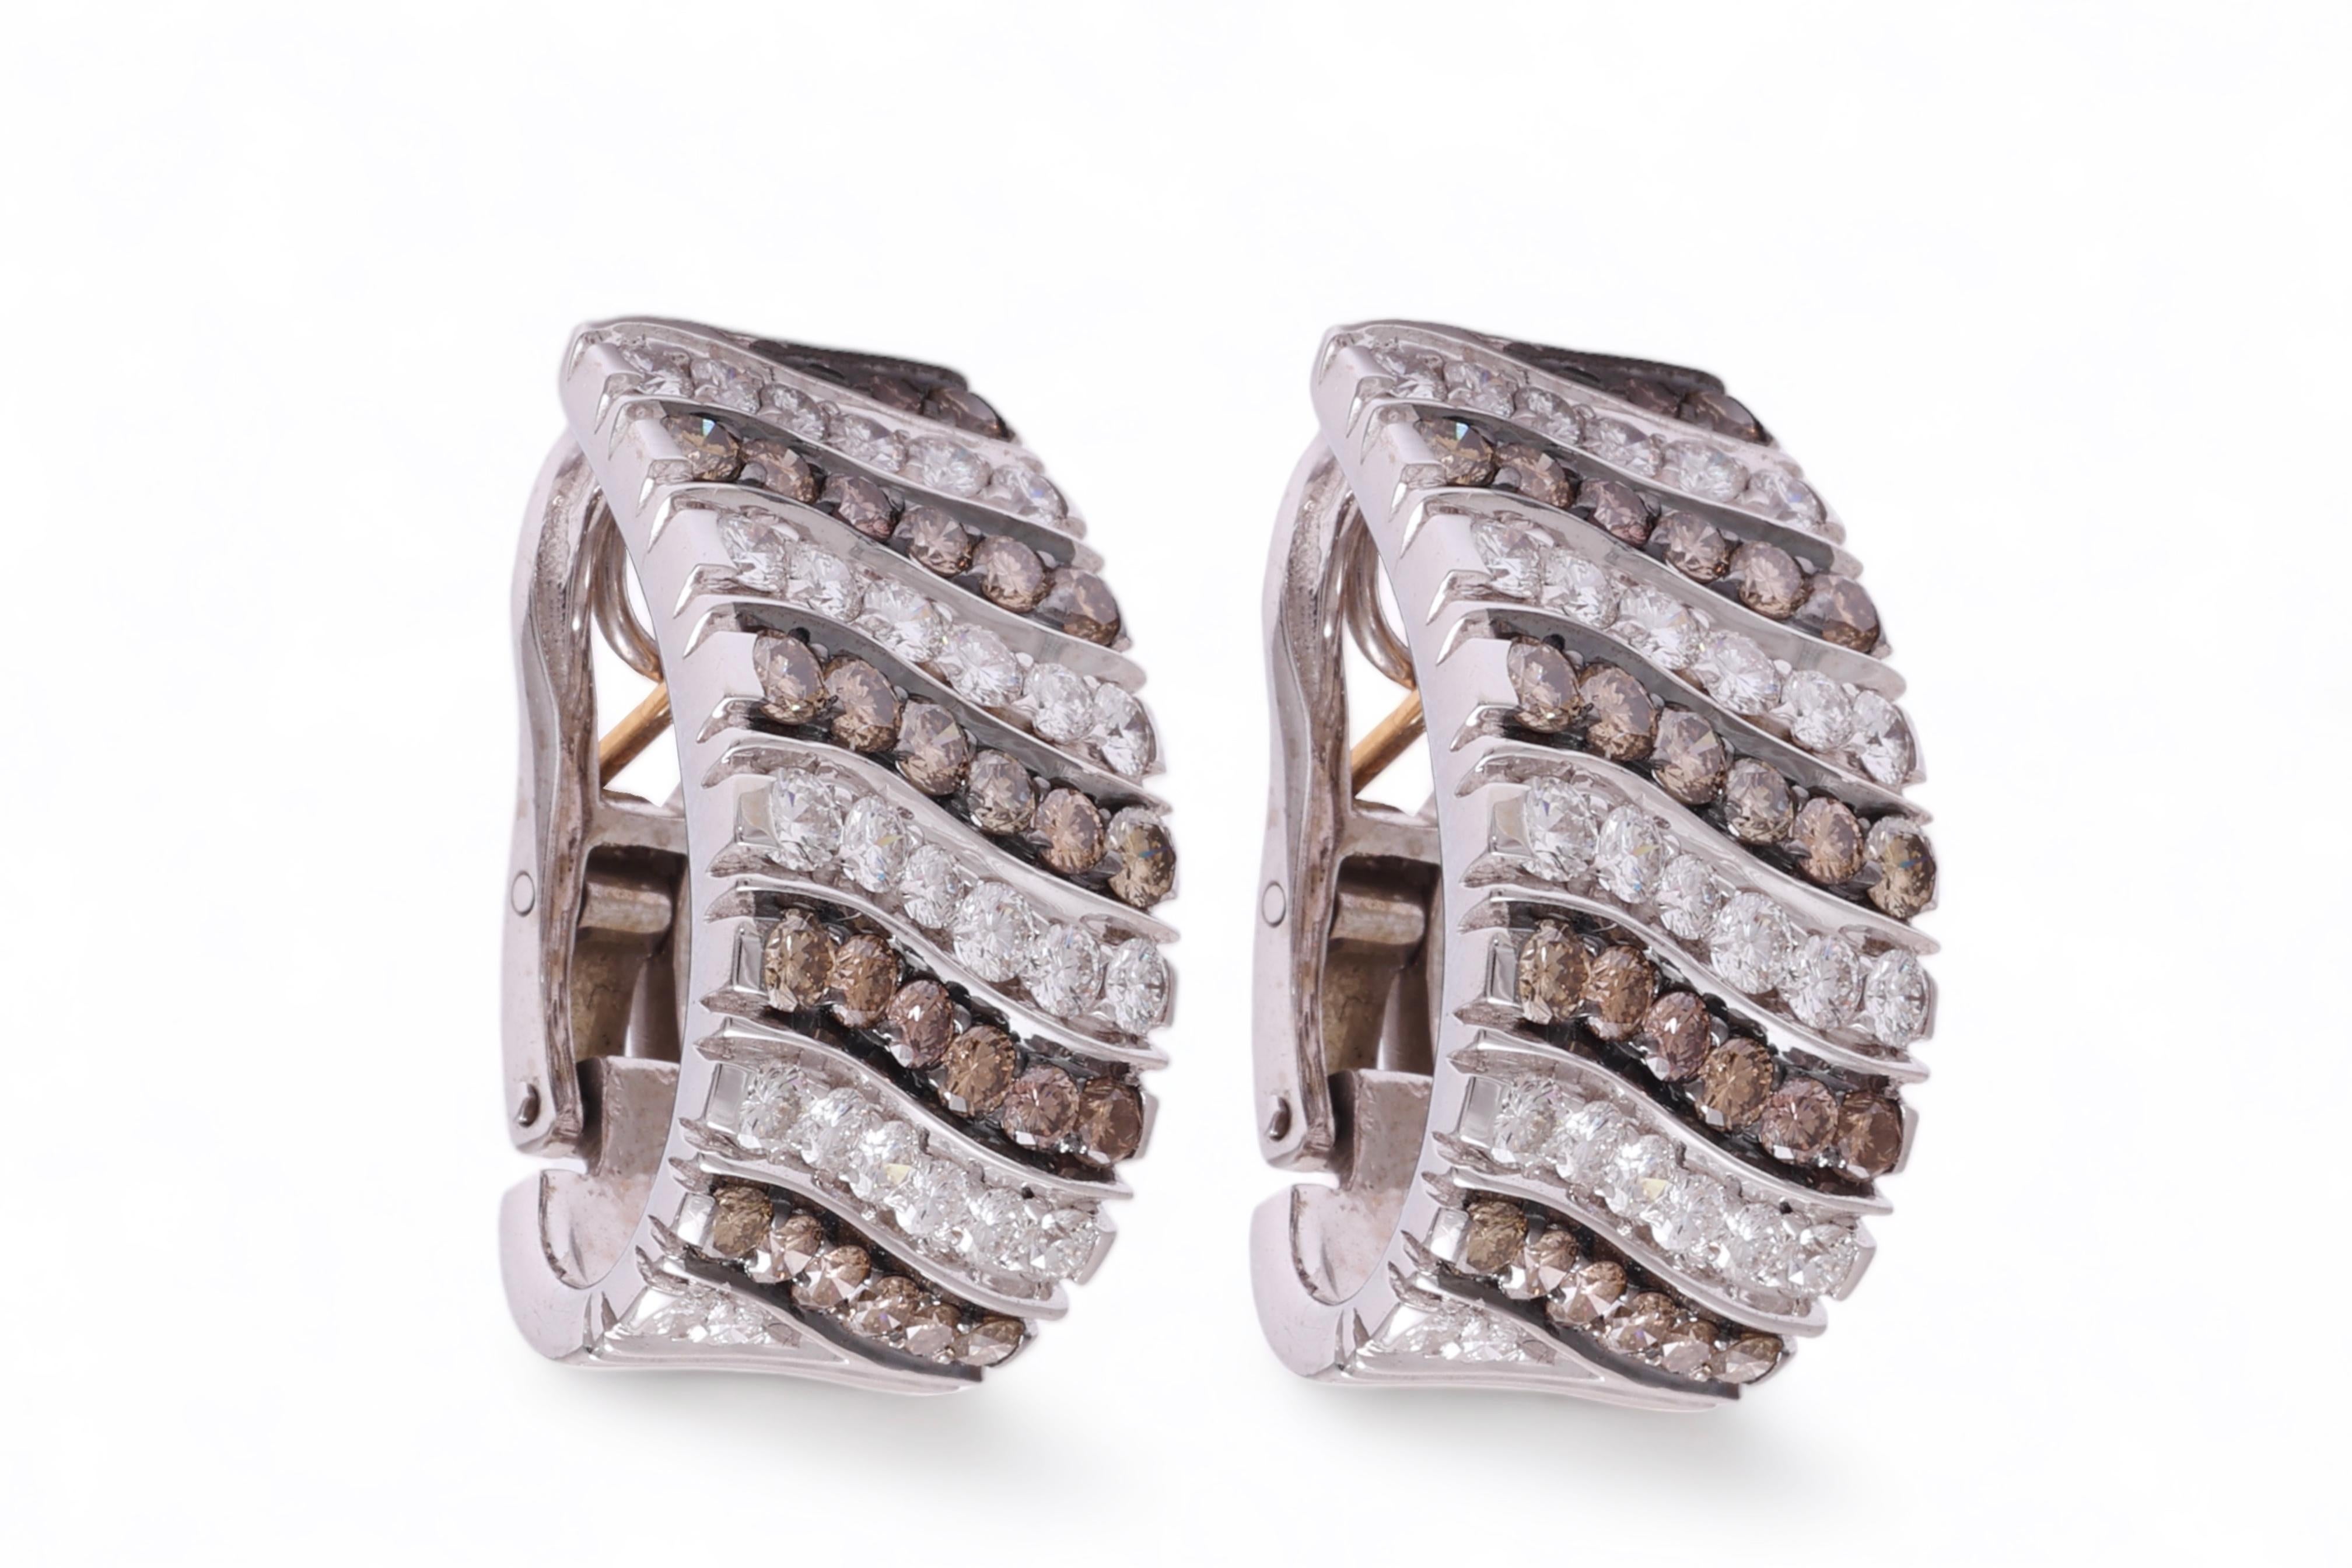 Brilliant Cut 18 kt. White Gold Clip-on Earrings With 4.16 ct. Cognac & White Diamonds For Sale